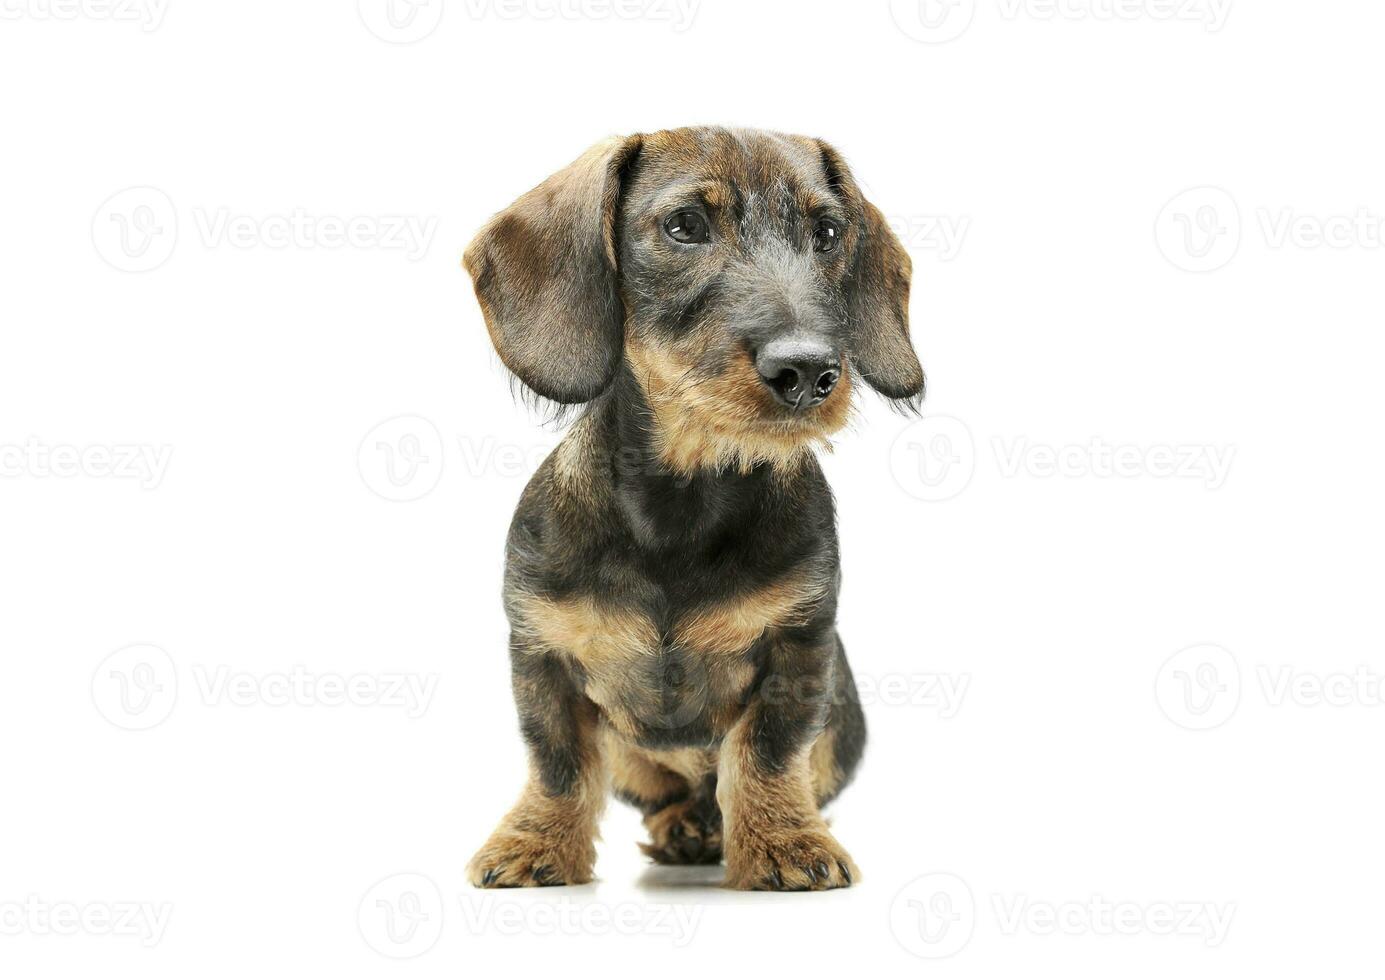 Studio shot of an adorable wired haired Dachshund sitting and looking curiously photo